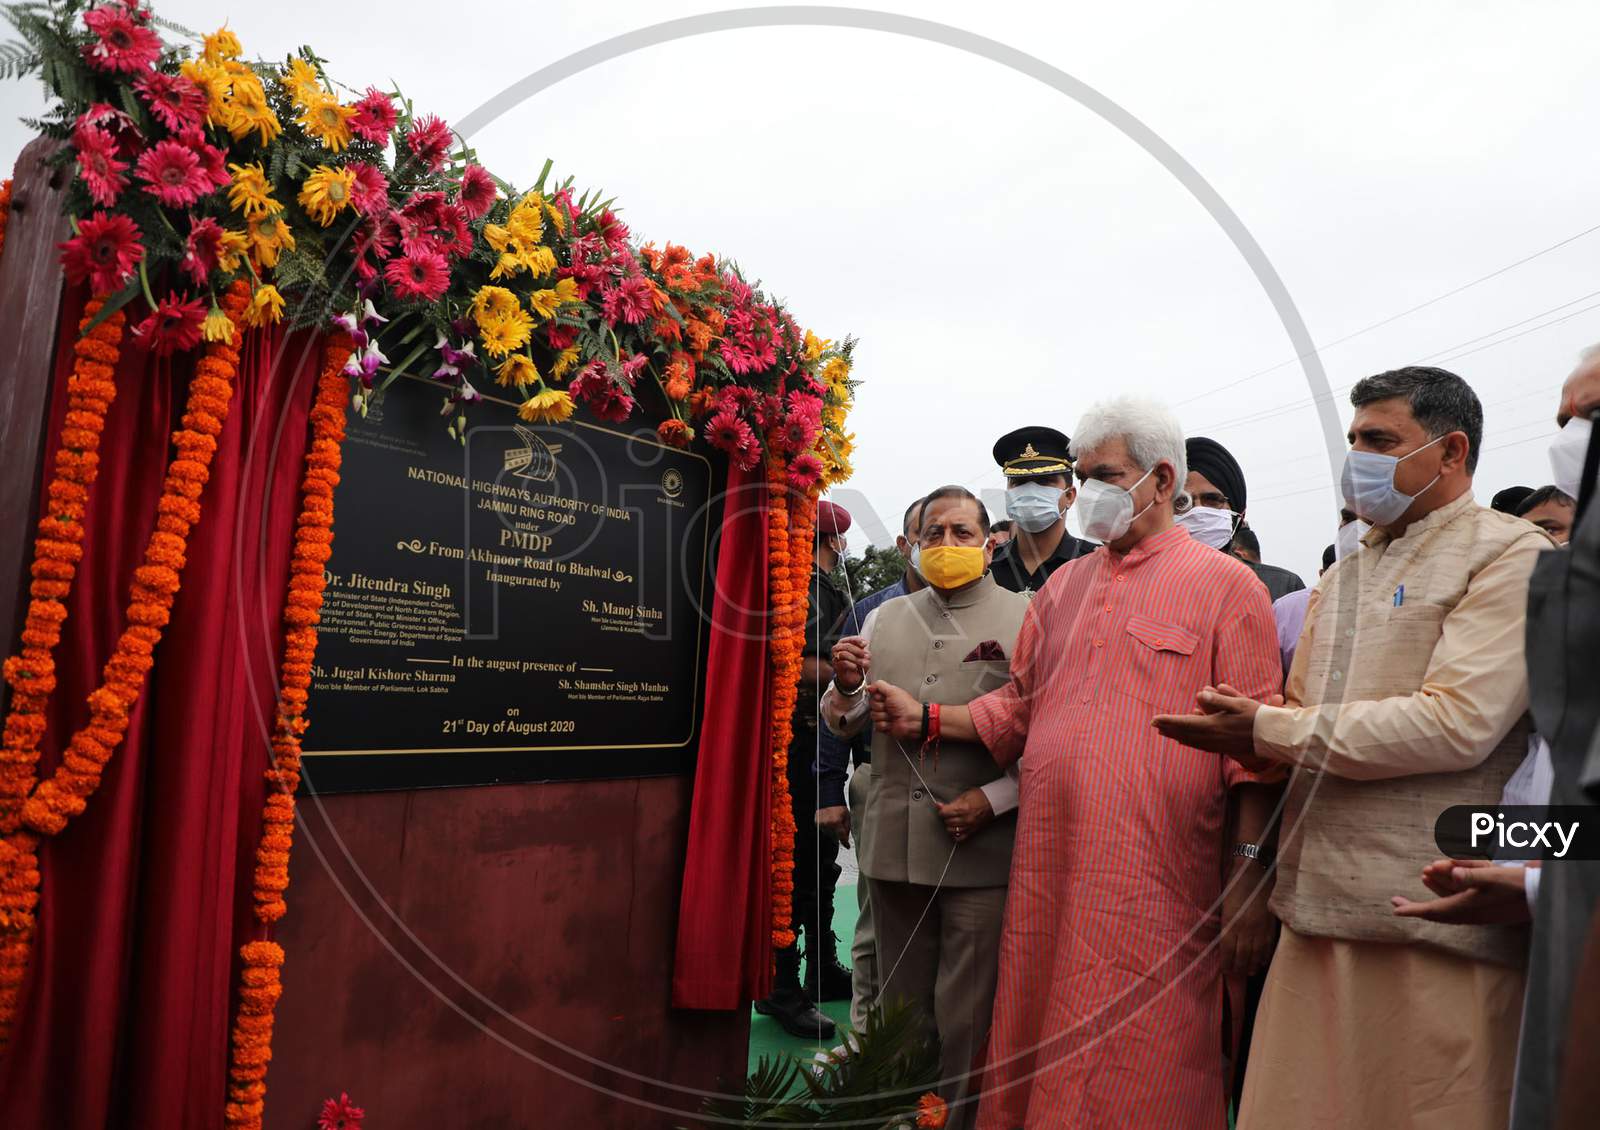 Jammu and Kashmir Lt governor Manoj Sinha along with Dr Jatinder singh Union Minister of state and MP Jugal Kishore,MP shamsher singh Manhas inaugurate Ring road under (PMDP) from Akhnoor road to Bhalwal in Jammu on August 21,2020.